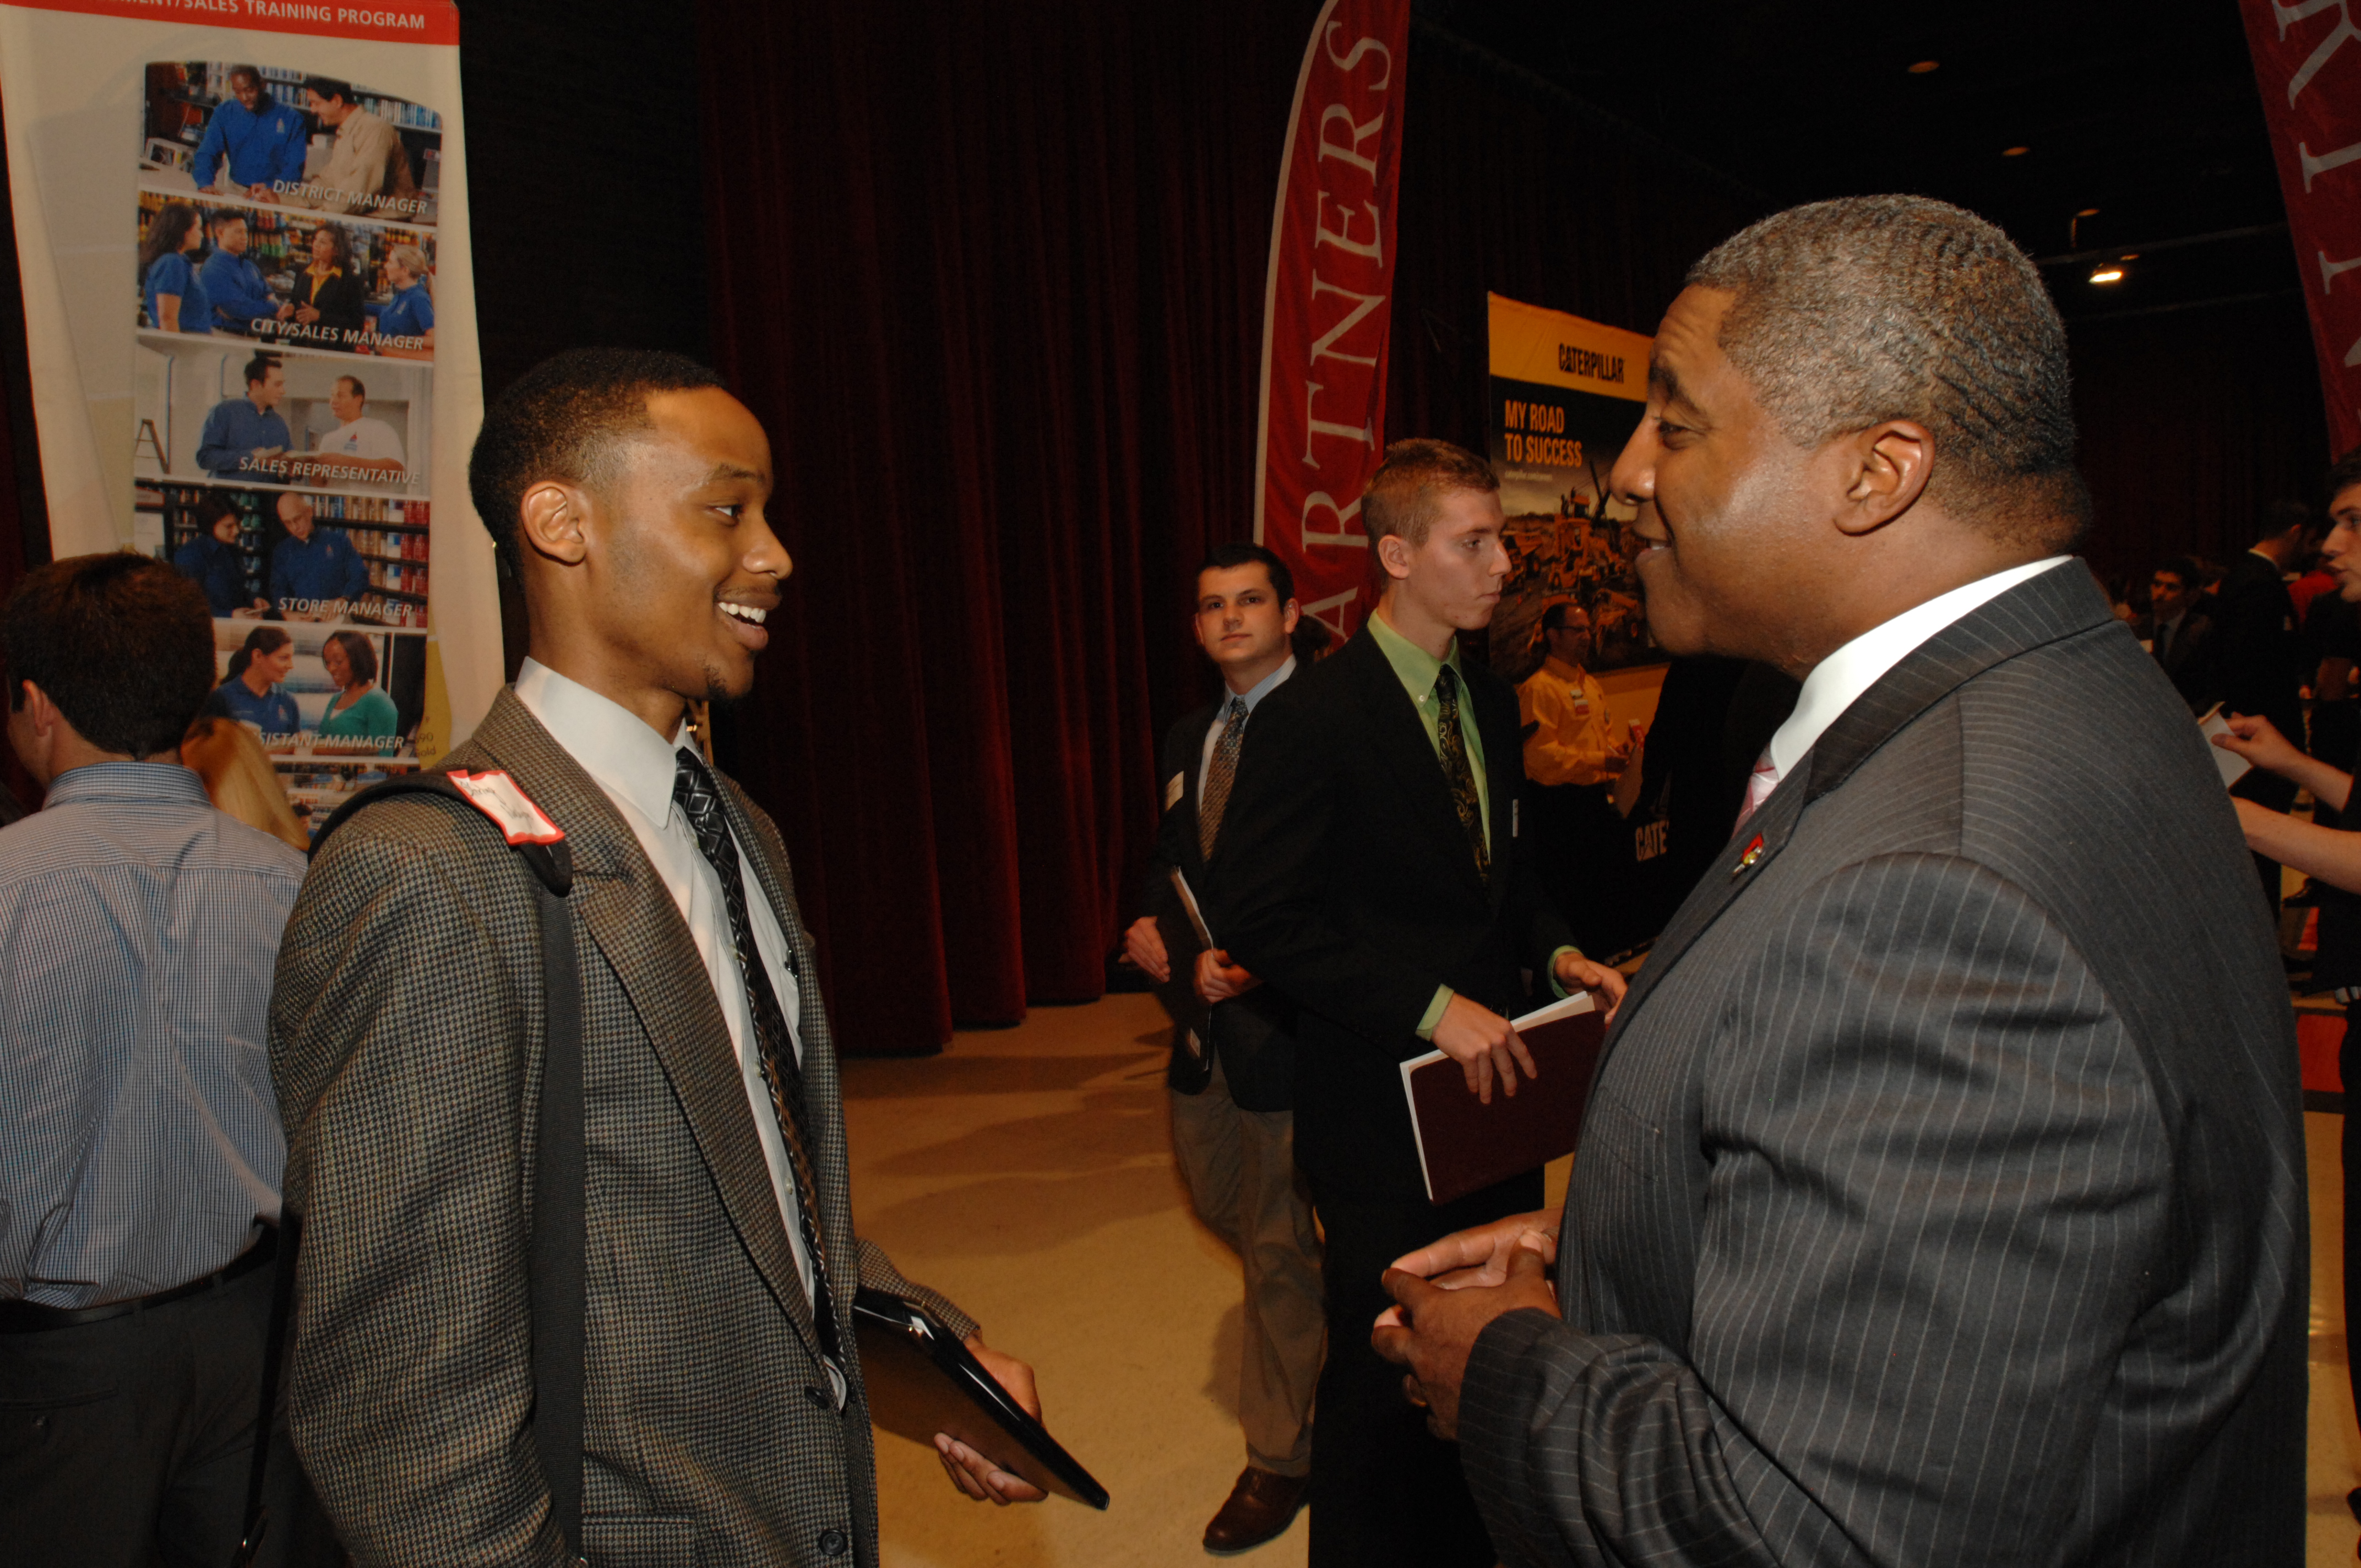 Drew Butts, Enterprise group talent manager (right), talks with an Illinois State student about his experience at a career fair.